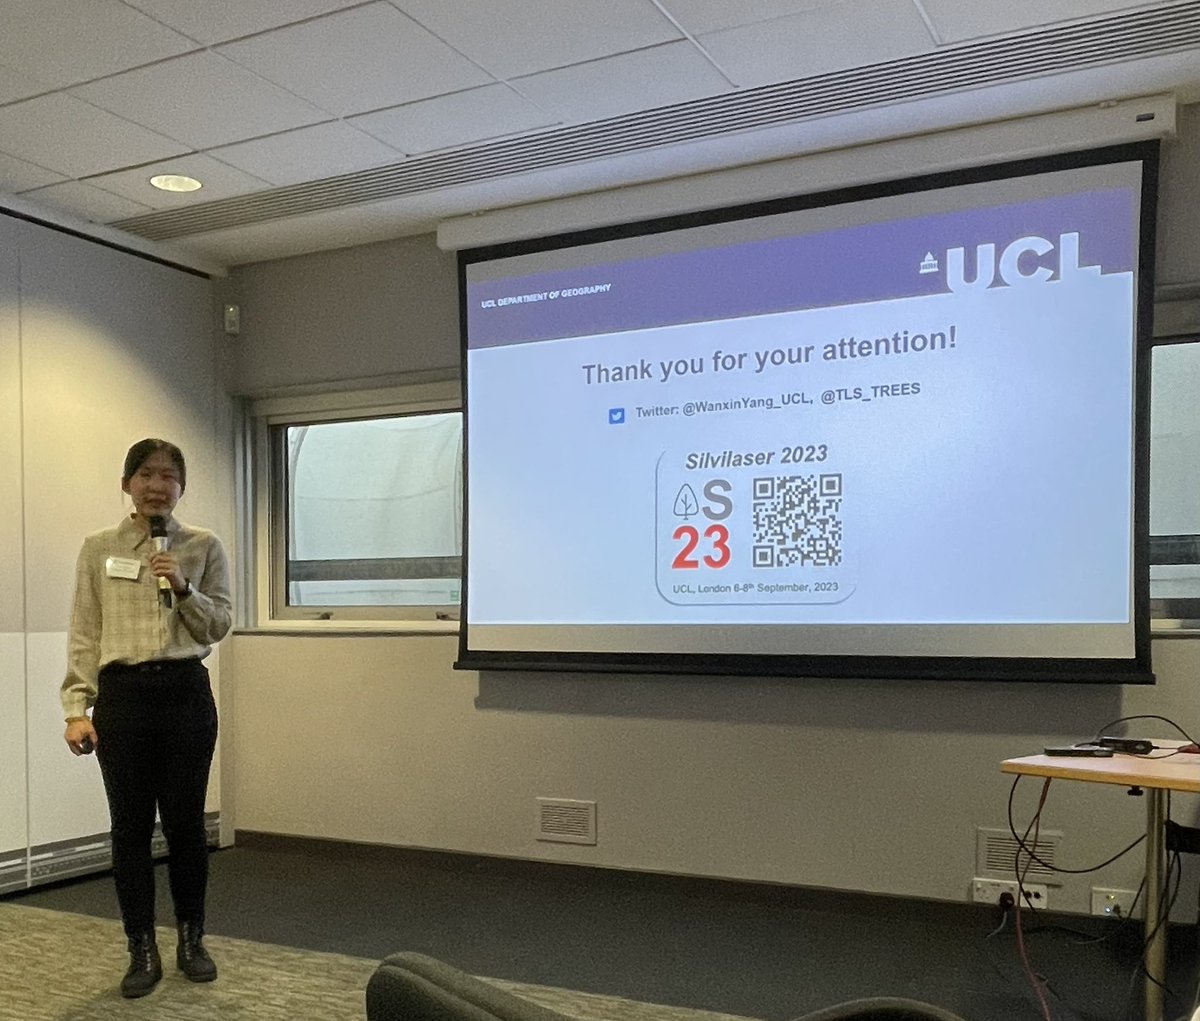 An excellent presentation by @WanxinYang_UCL on 3D tree branching reconstruction and a shout out for our upcoming SilviLaser 2023 conference at UCL on 6-8 September